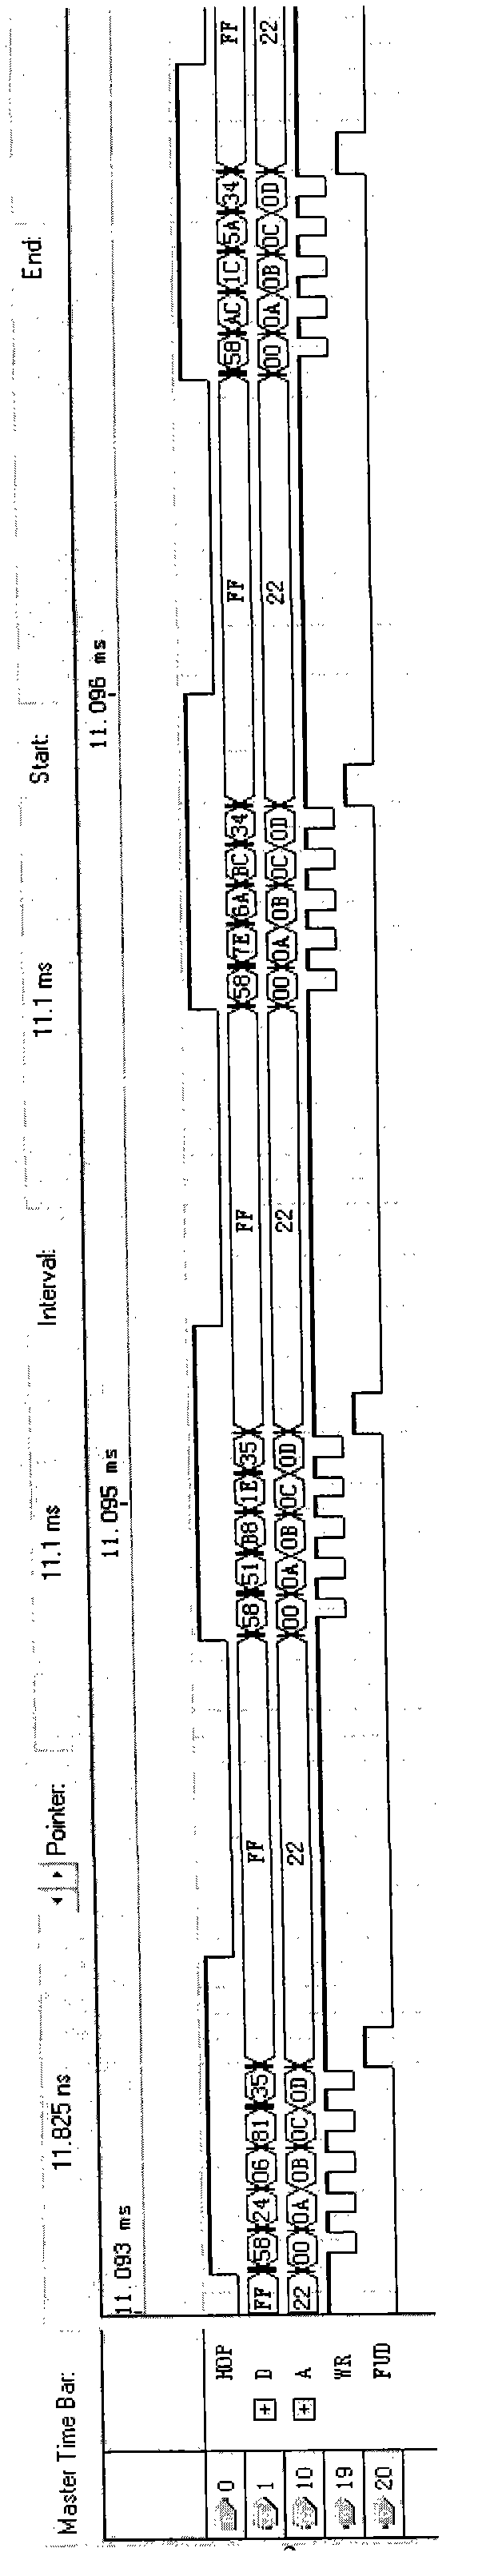 Method for generating stepped frequency signals based on combination of direct digital synthesis (DDS) and ping-pong phase locked loop